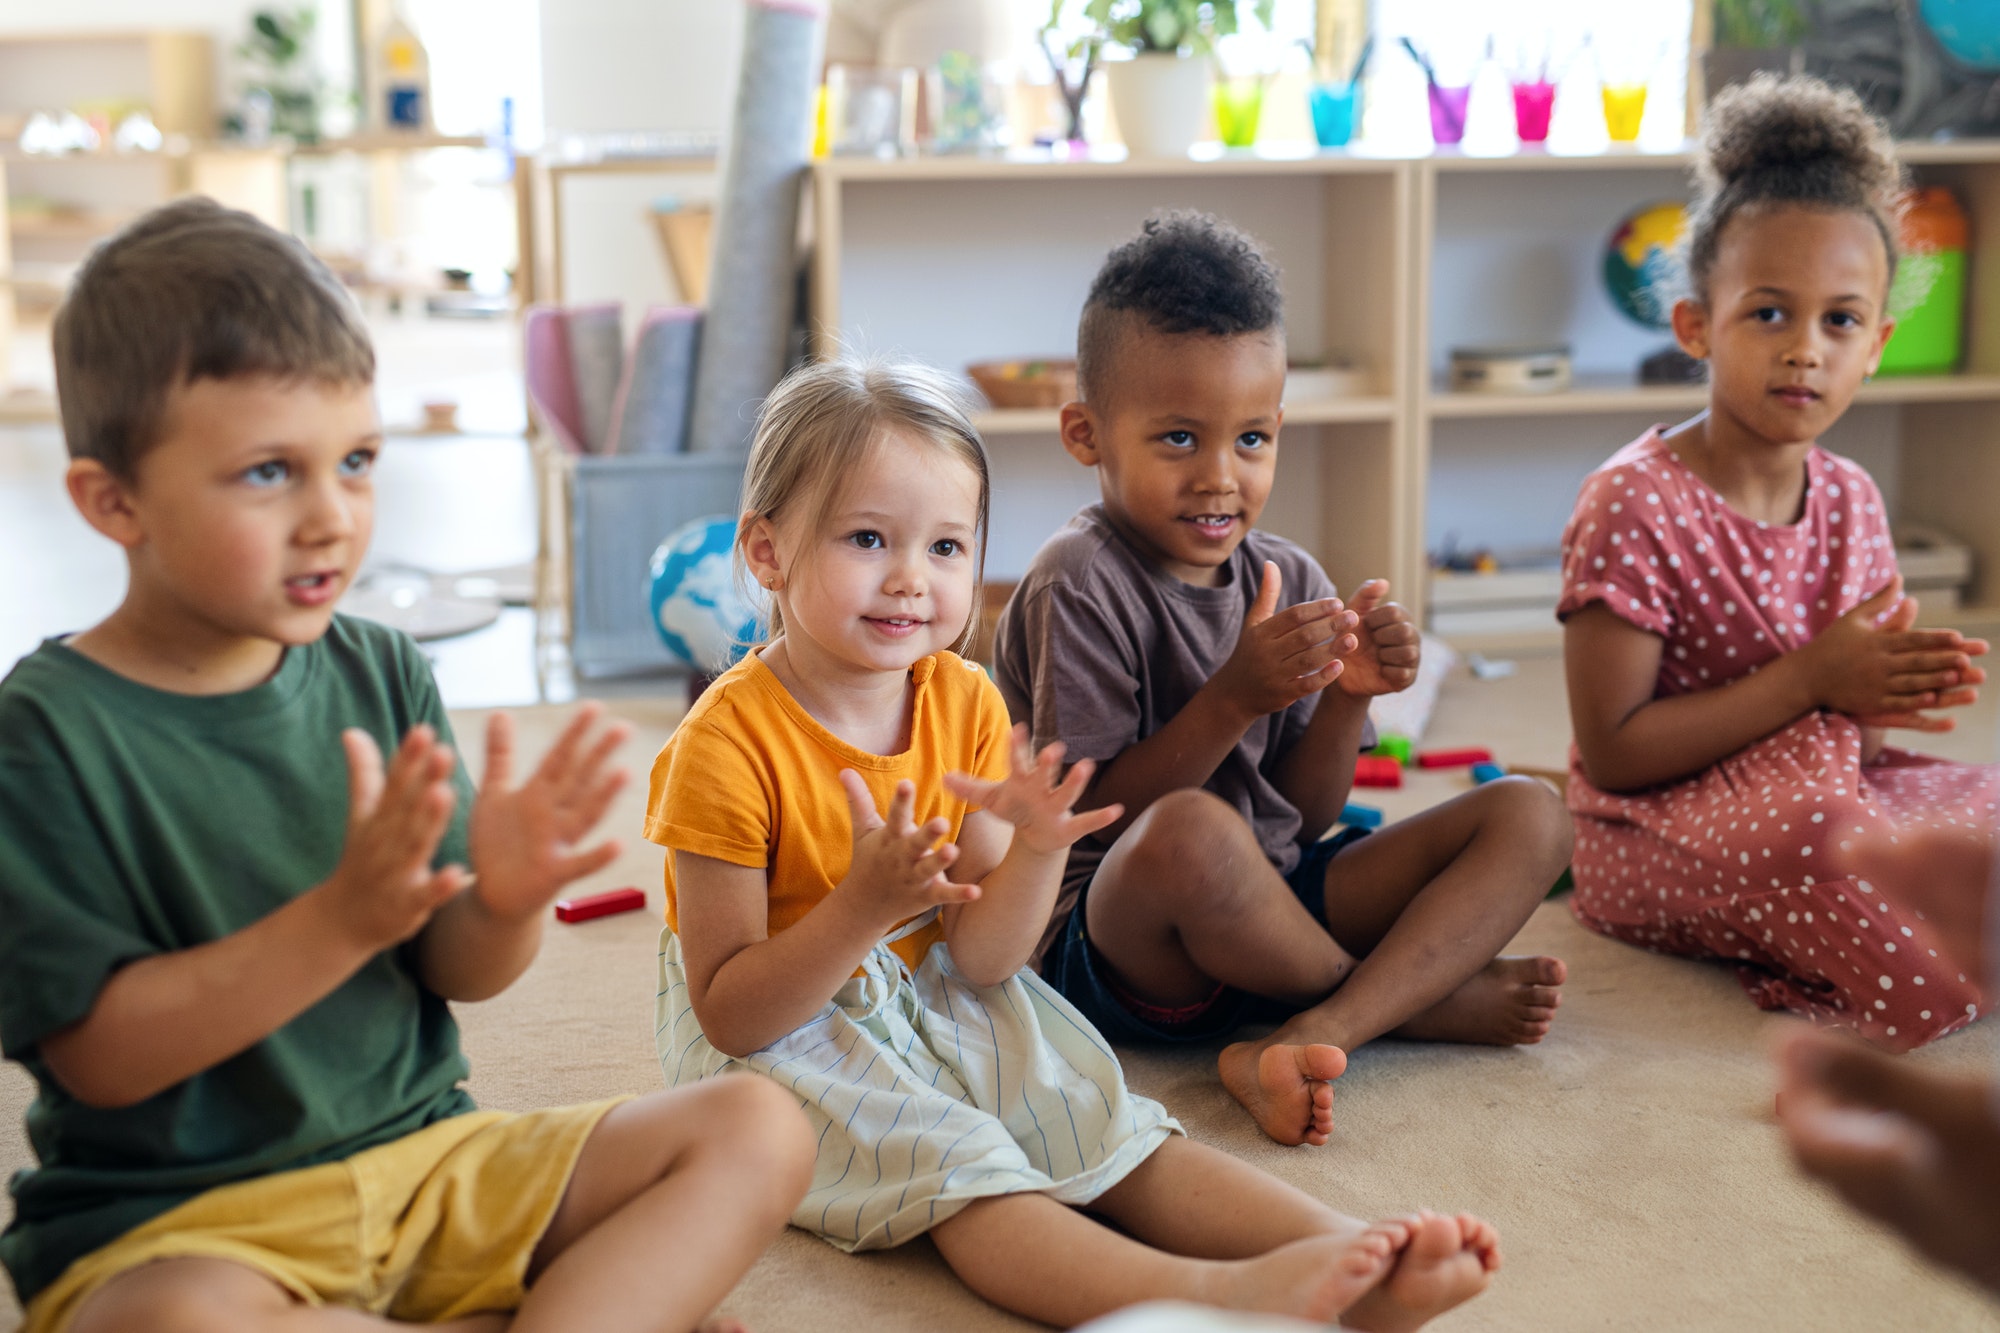 Group of small nursery school children sitting on floor indoors in classroom, clapping